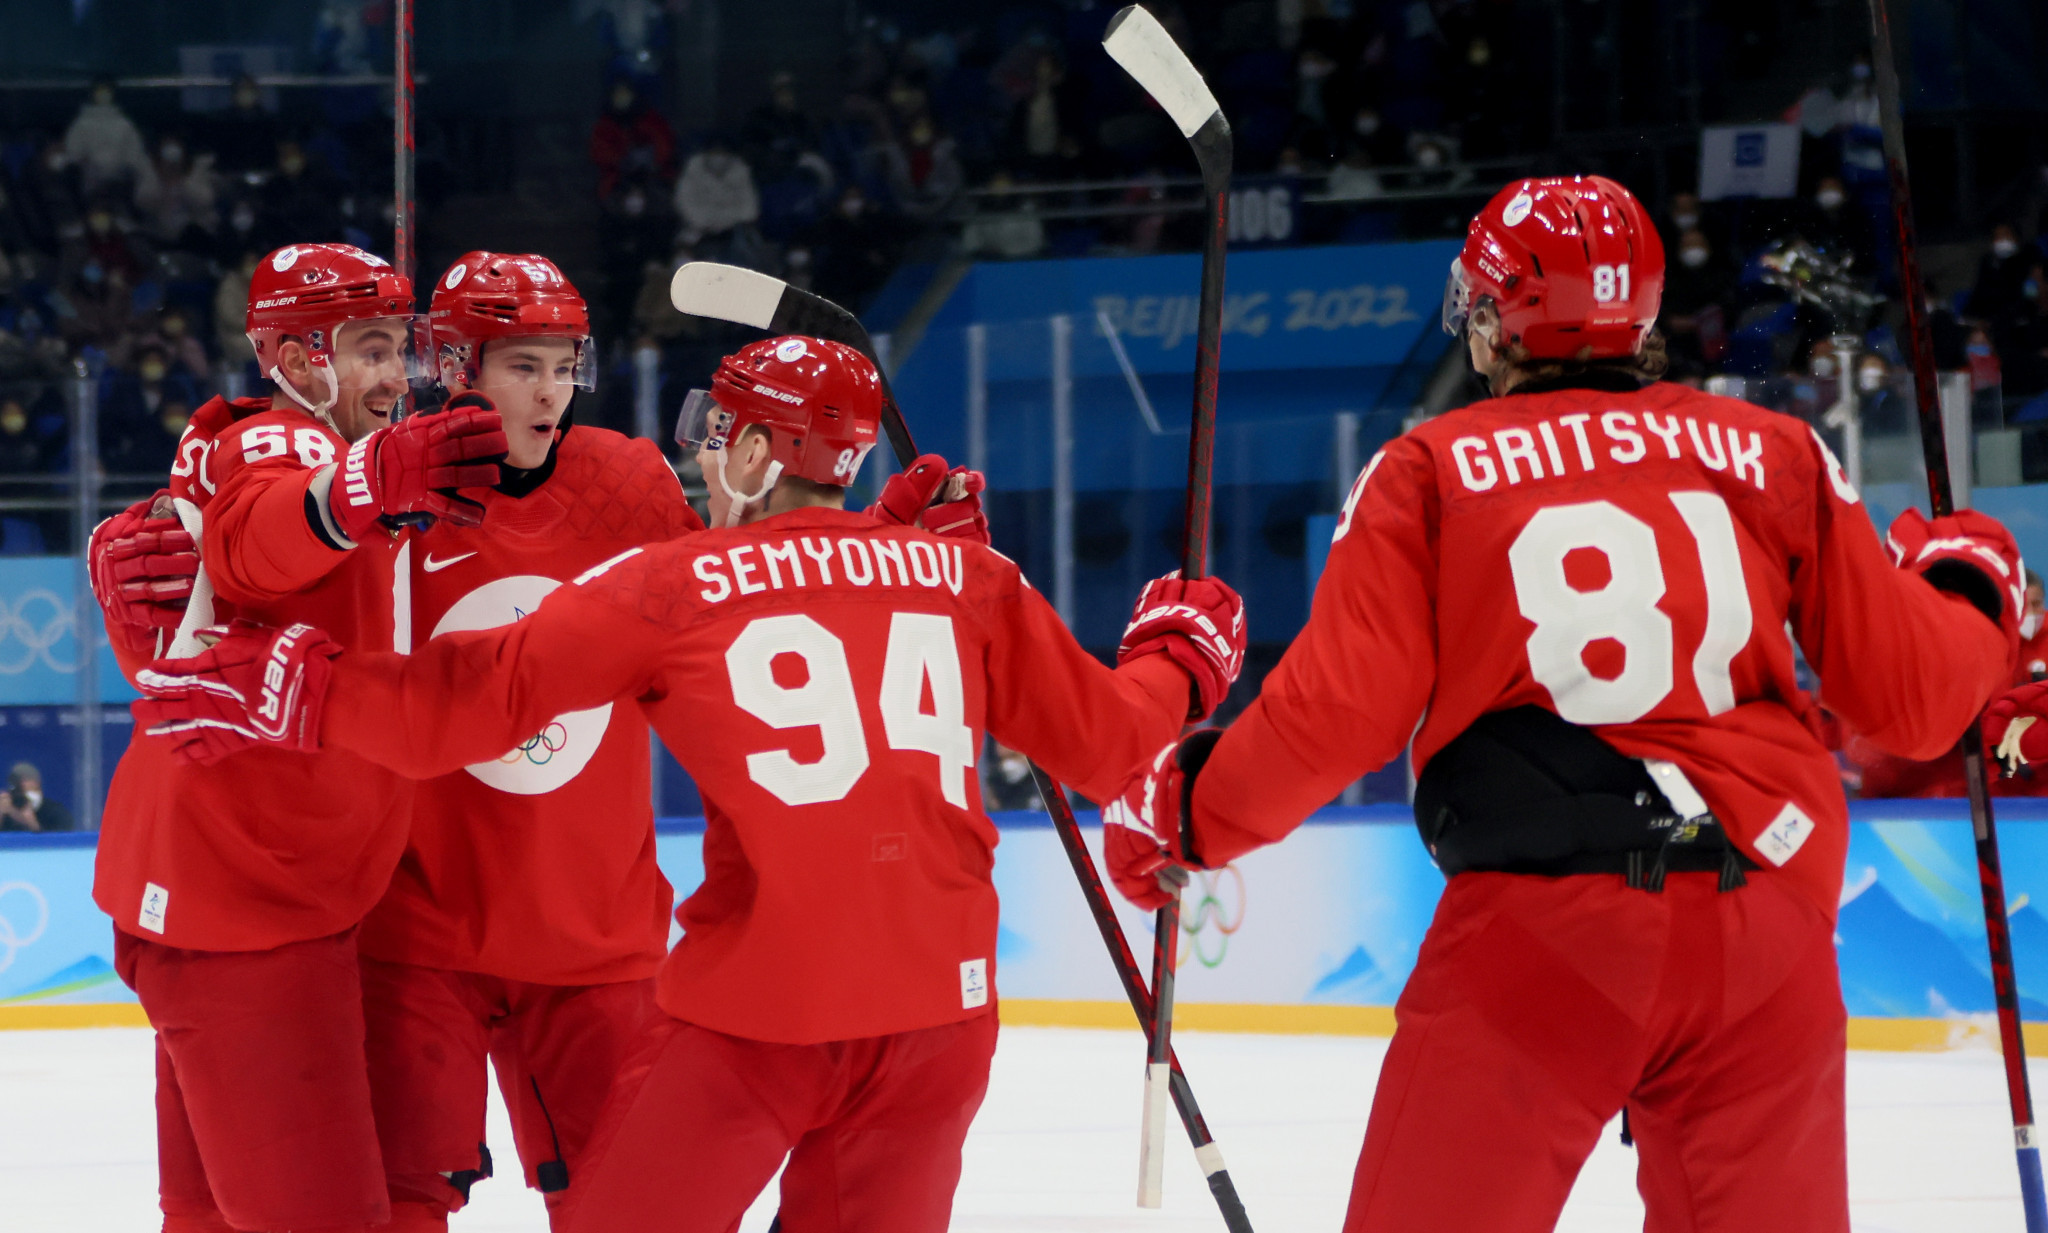 All Russian national teams have been suspended by the IIHF ©Getty Images